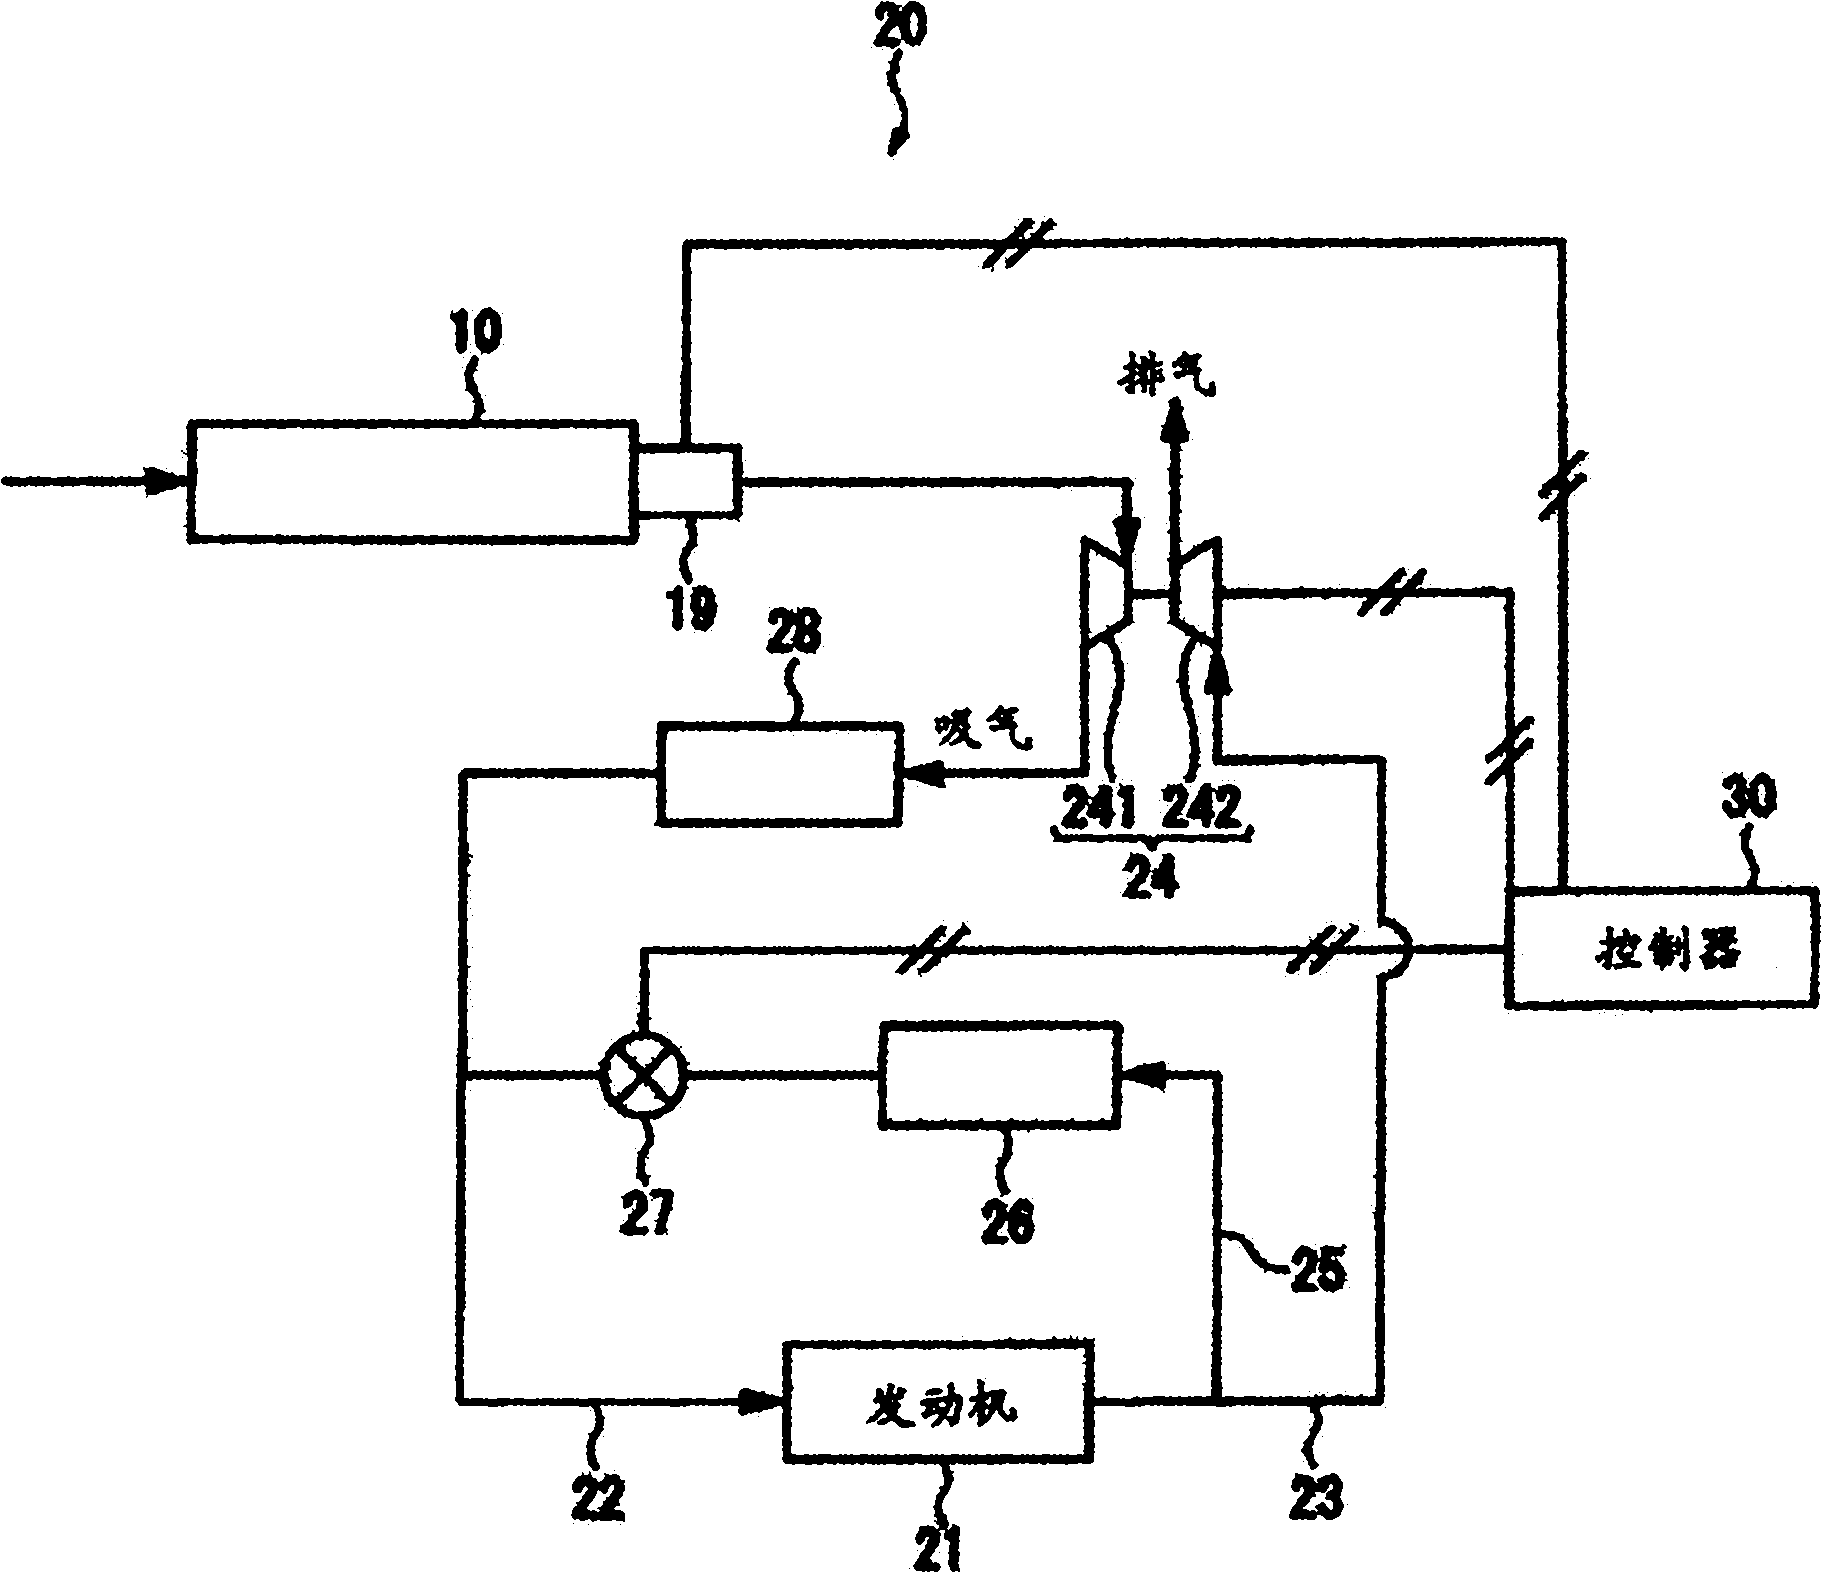 Air cleaner, and engine control system